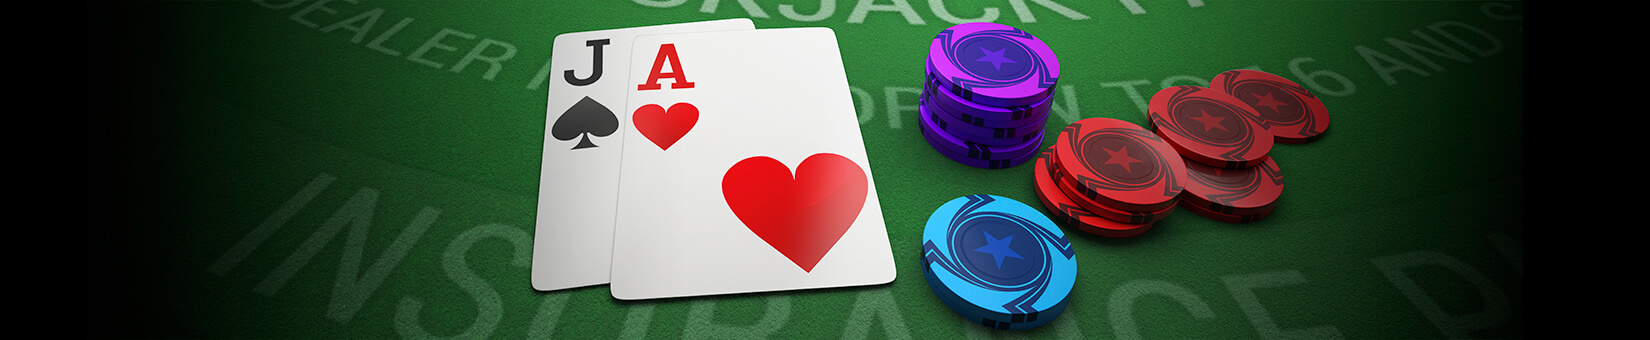 casino chips and playing cards